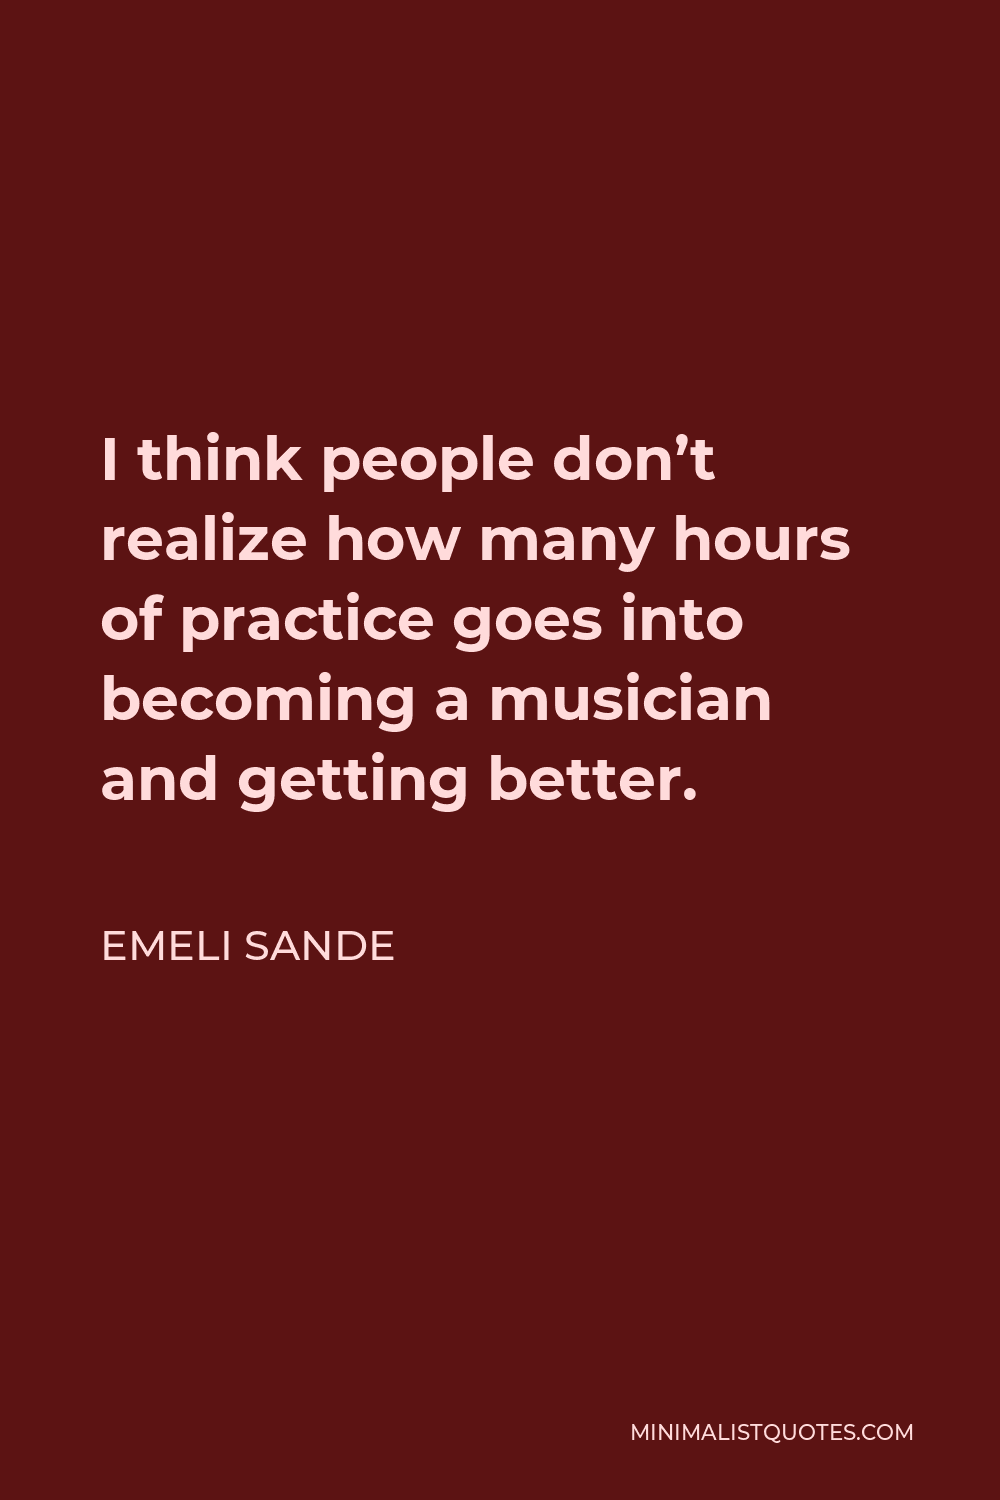 Emeli Sande Quote - I think people don’t realize how many hours of practice goes into becoming a musician and getting better.